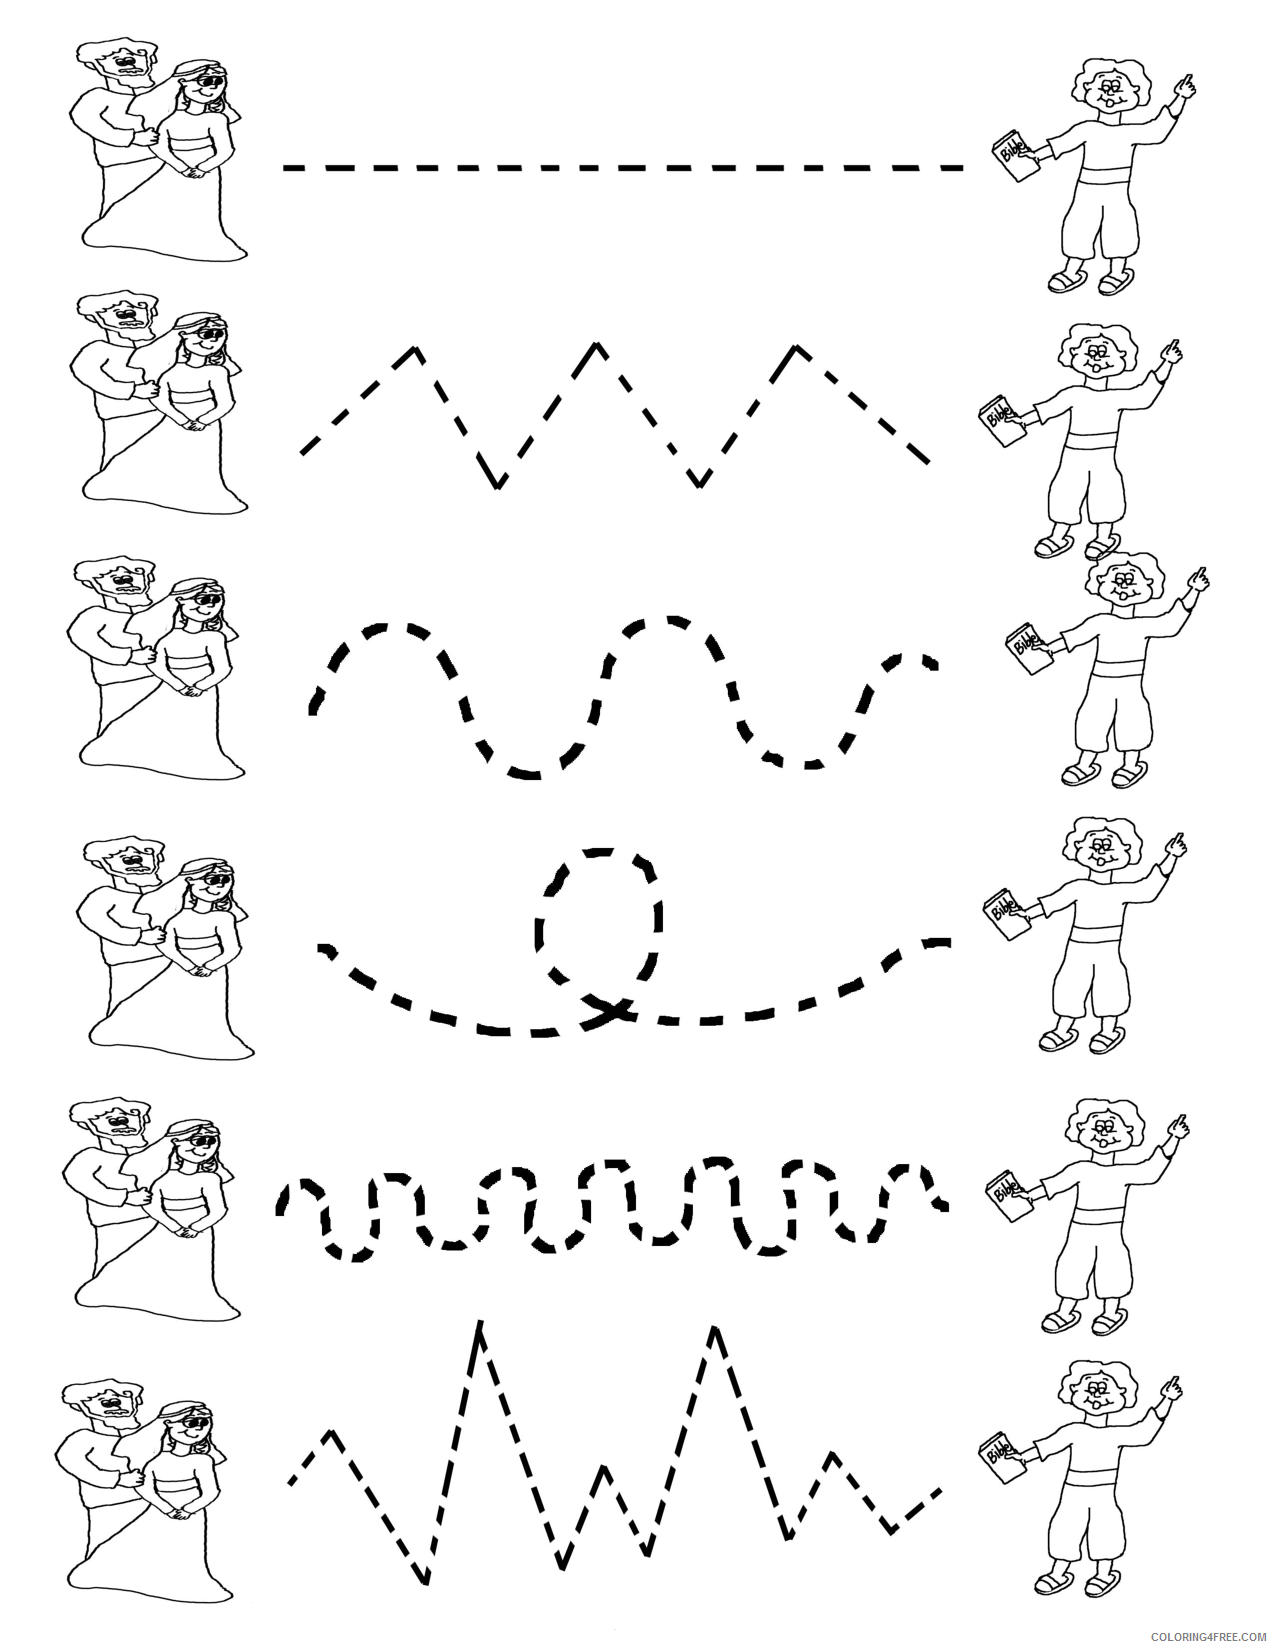 Preschool Worksheets Coloring Pages Preschool Tracing Matching Printable 2021 Coloring4free